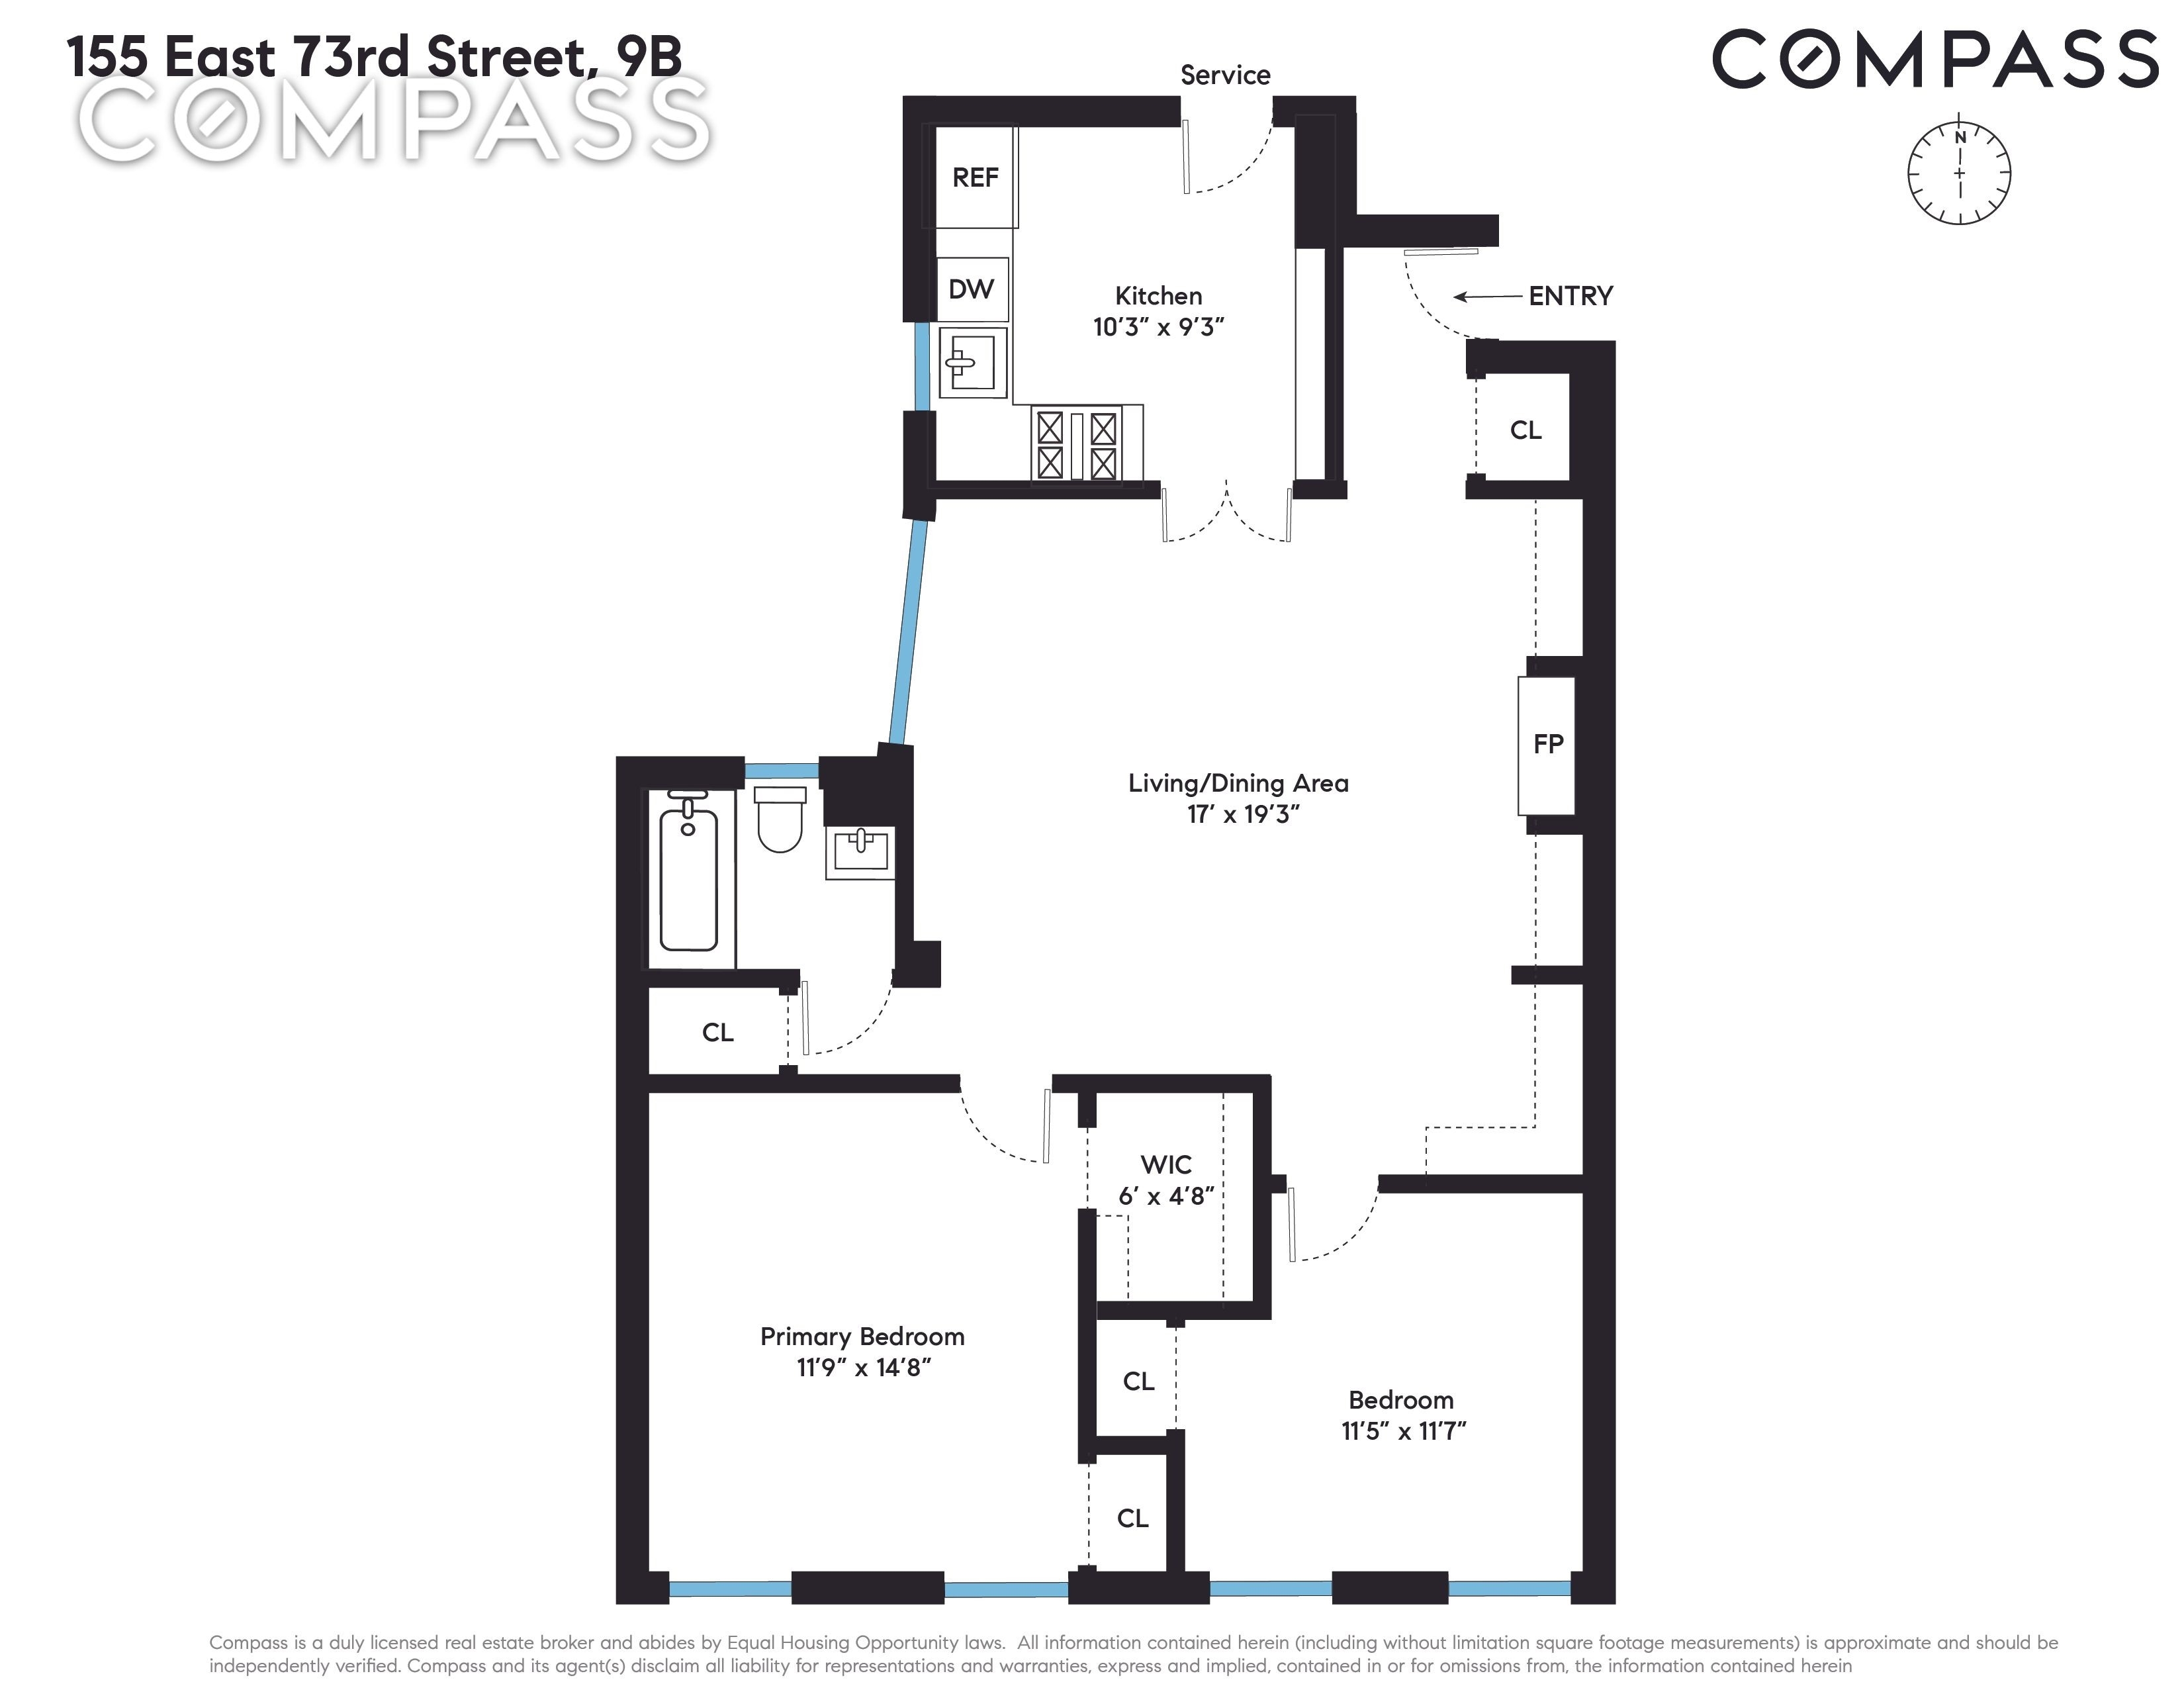 Co-op Properties for Sale at 155 E 73RD ST, 9B Lenox Hill, New York, New York 10021